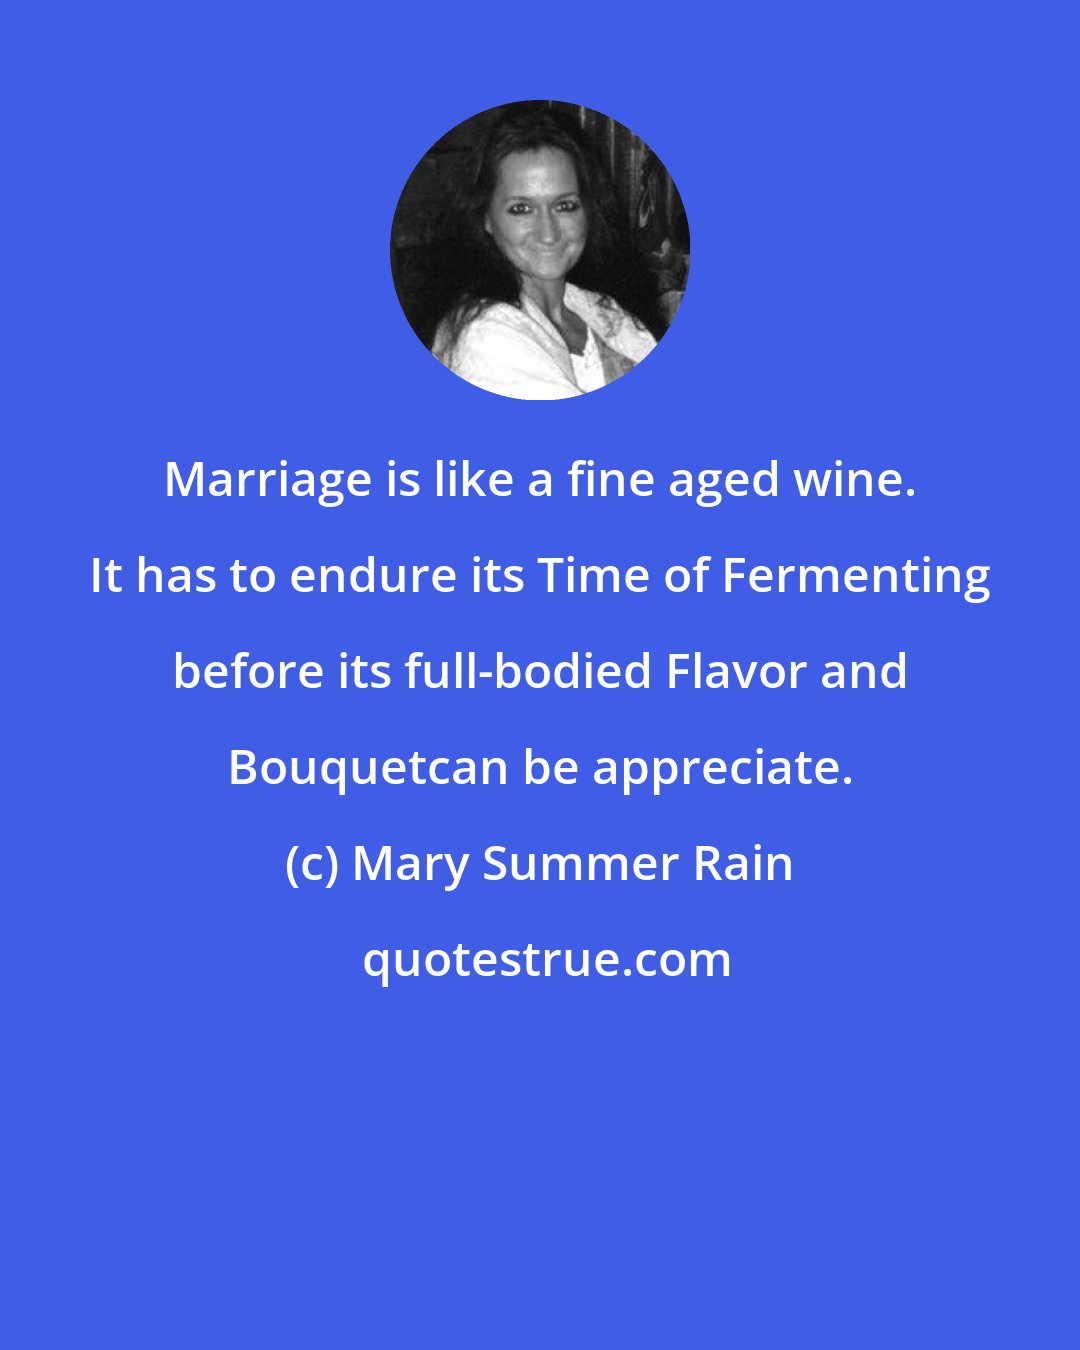 Mary Summer Rain: Marriage is like a fine aged wine. It has to endure its Time of Fermenting before its full-bodied Flavor and Bouquetcan be appreciate.